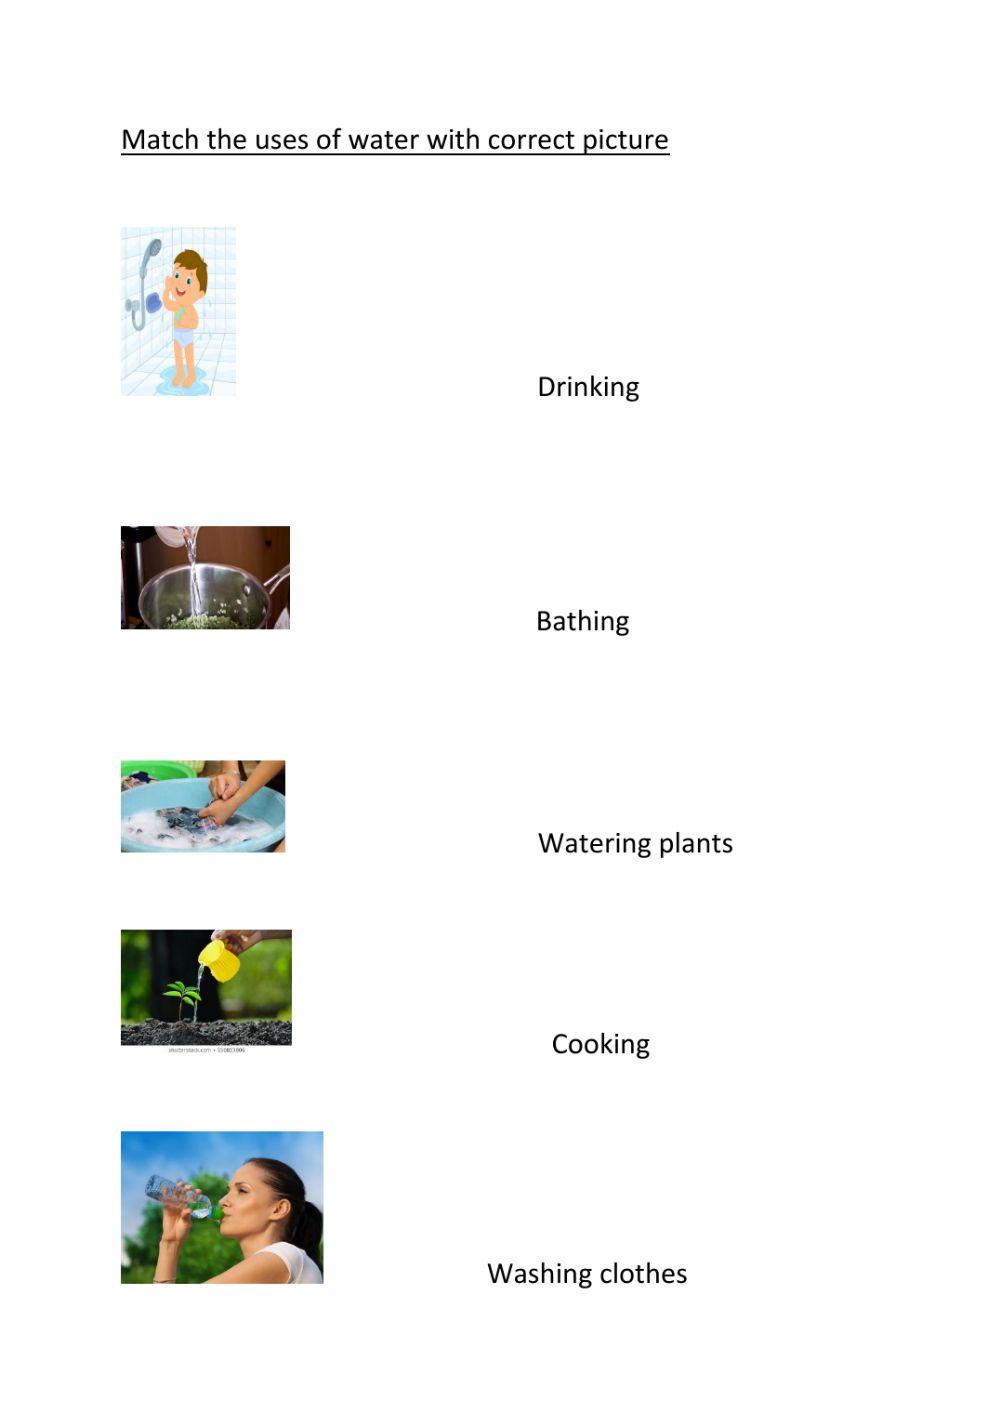 Uses of water